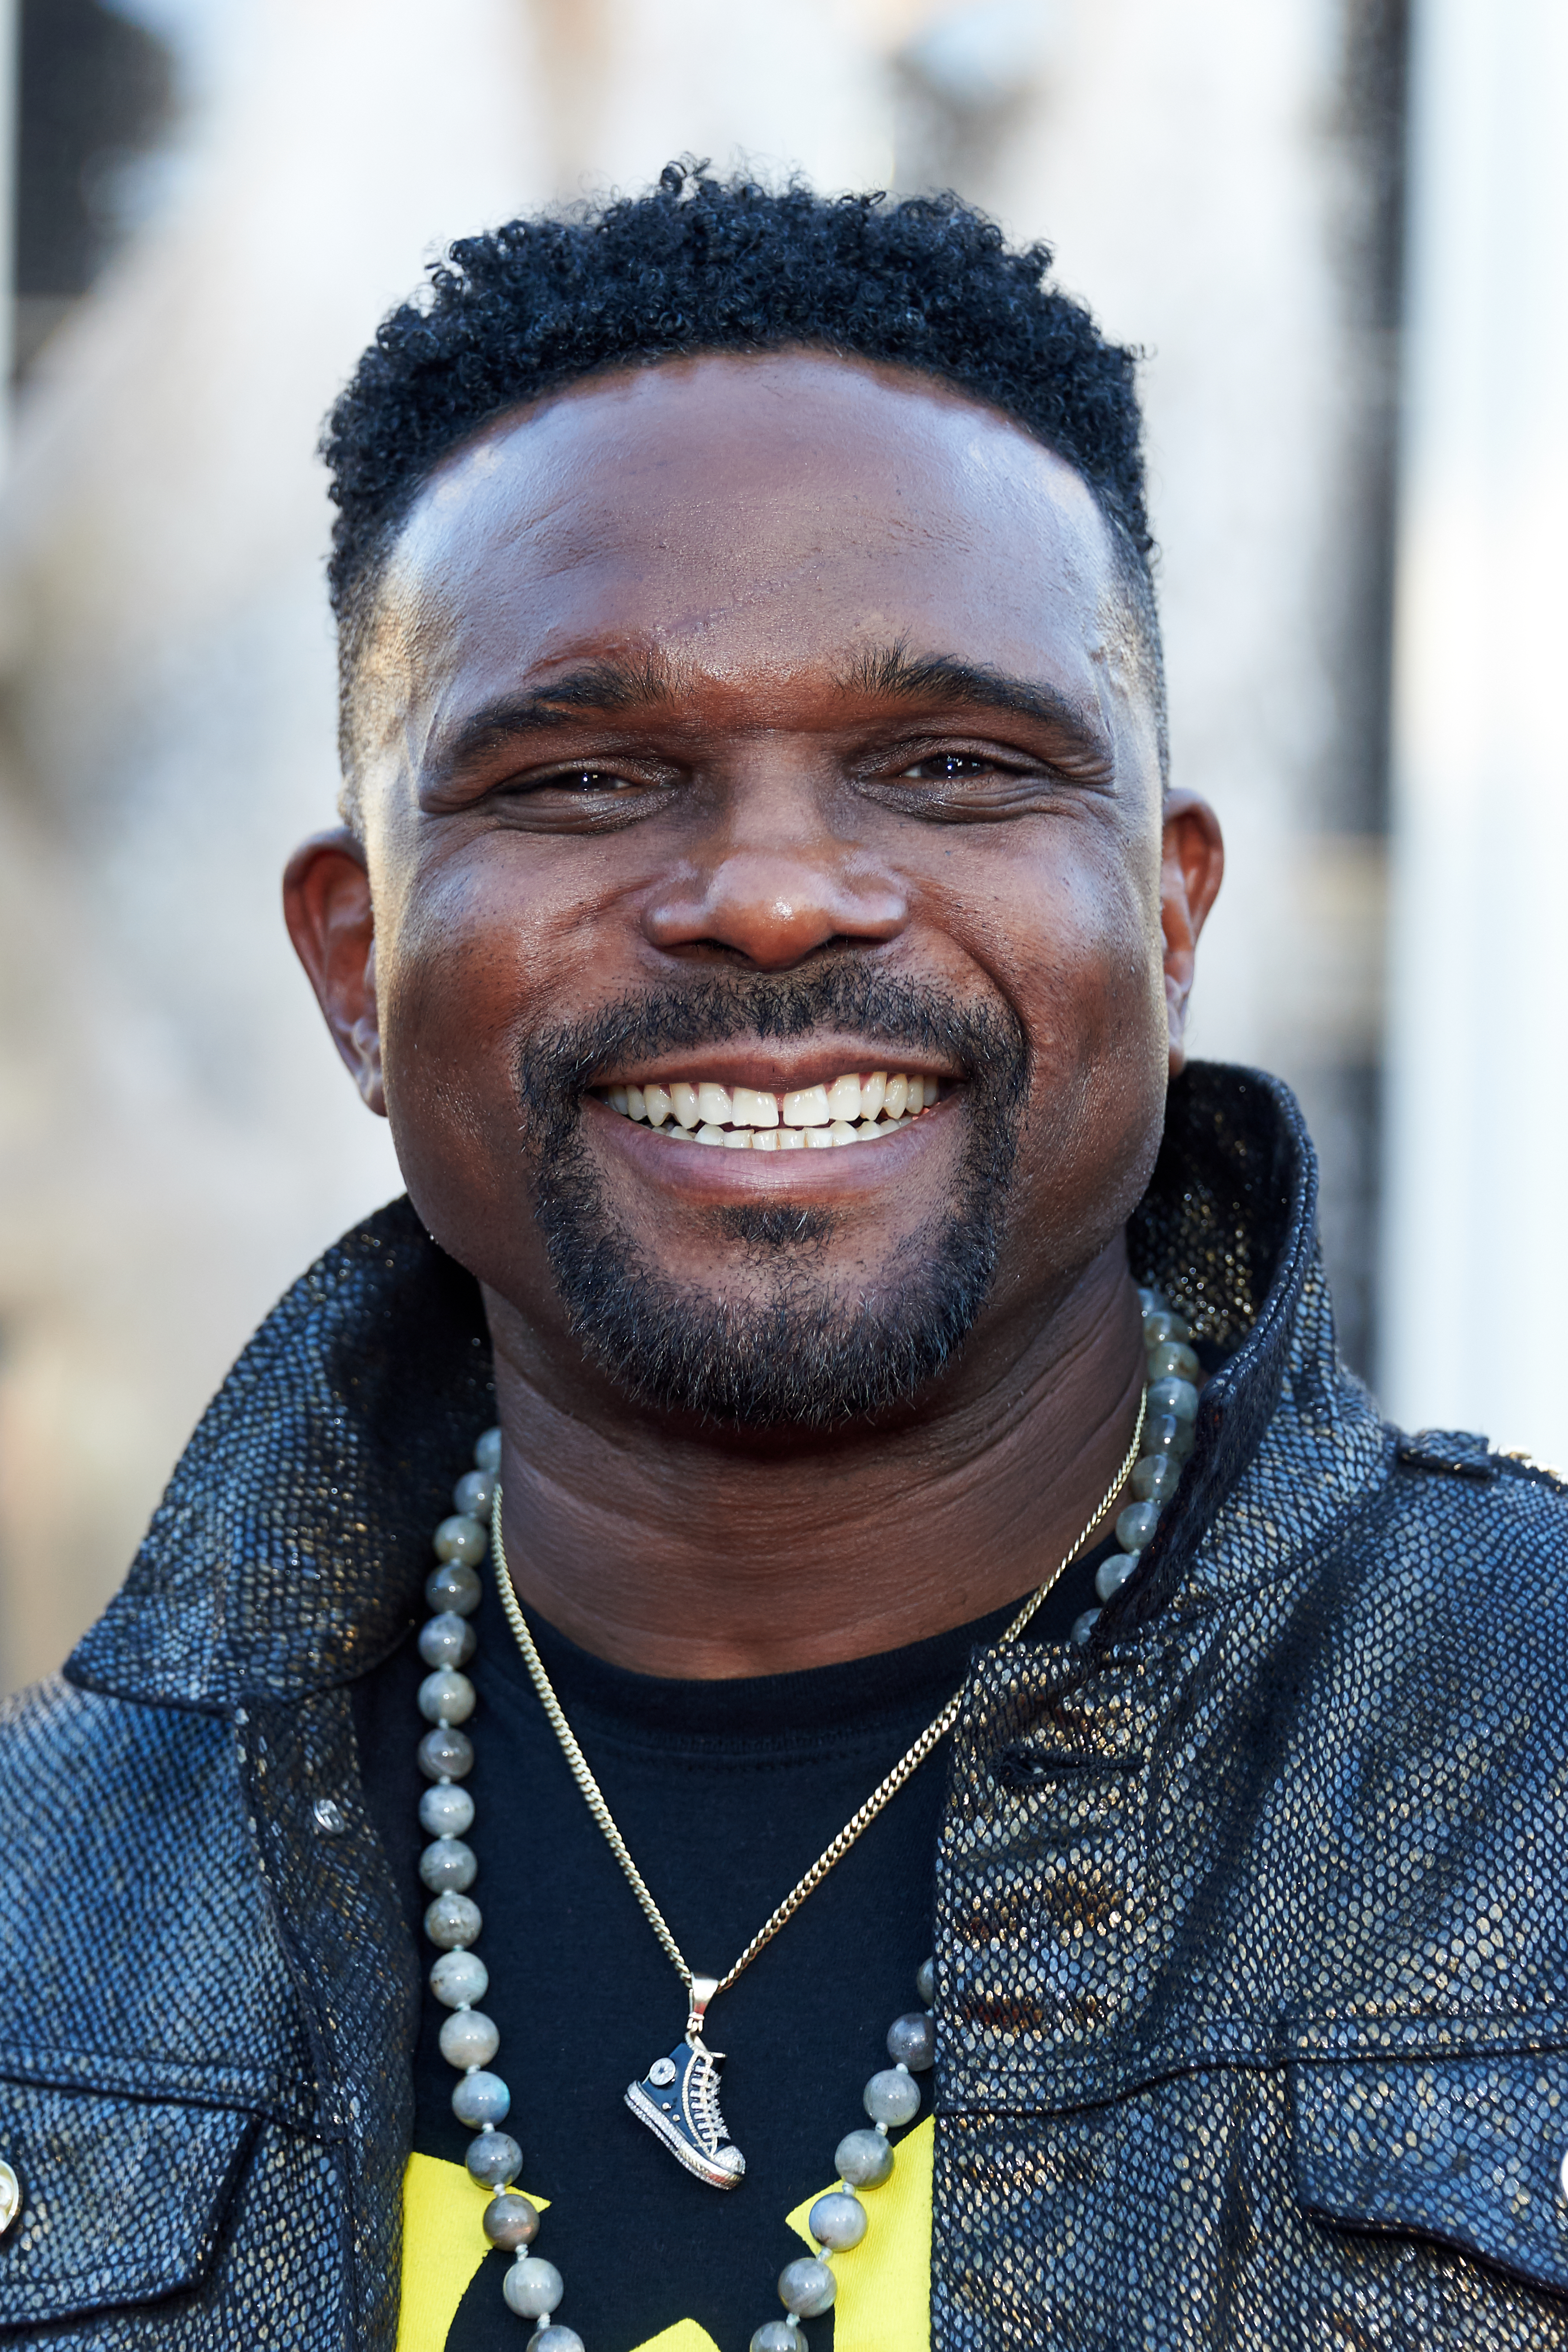 Darius McCrary attends the 2022 Hollywood and African Prestigious Awards at Ambassador Auditorium on October 29, 2022 in Pasadena, California. | Source: Getty Images